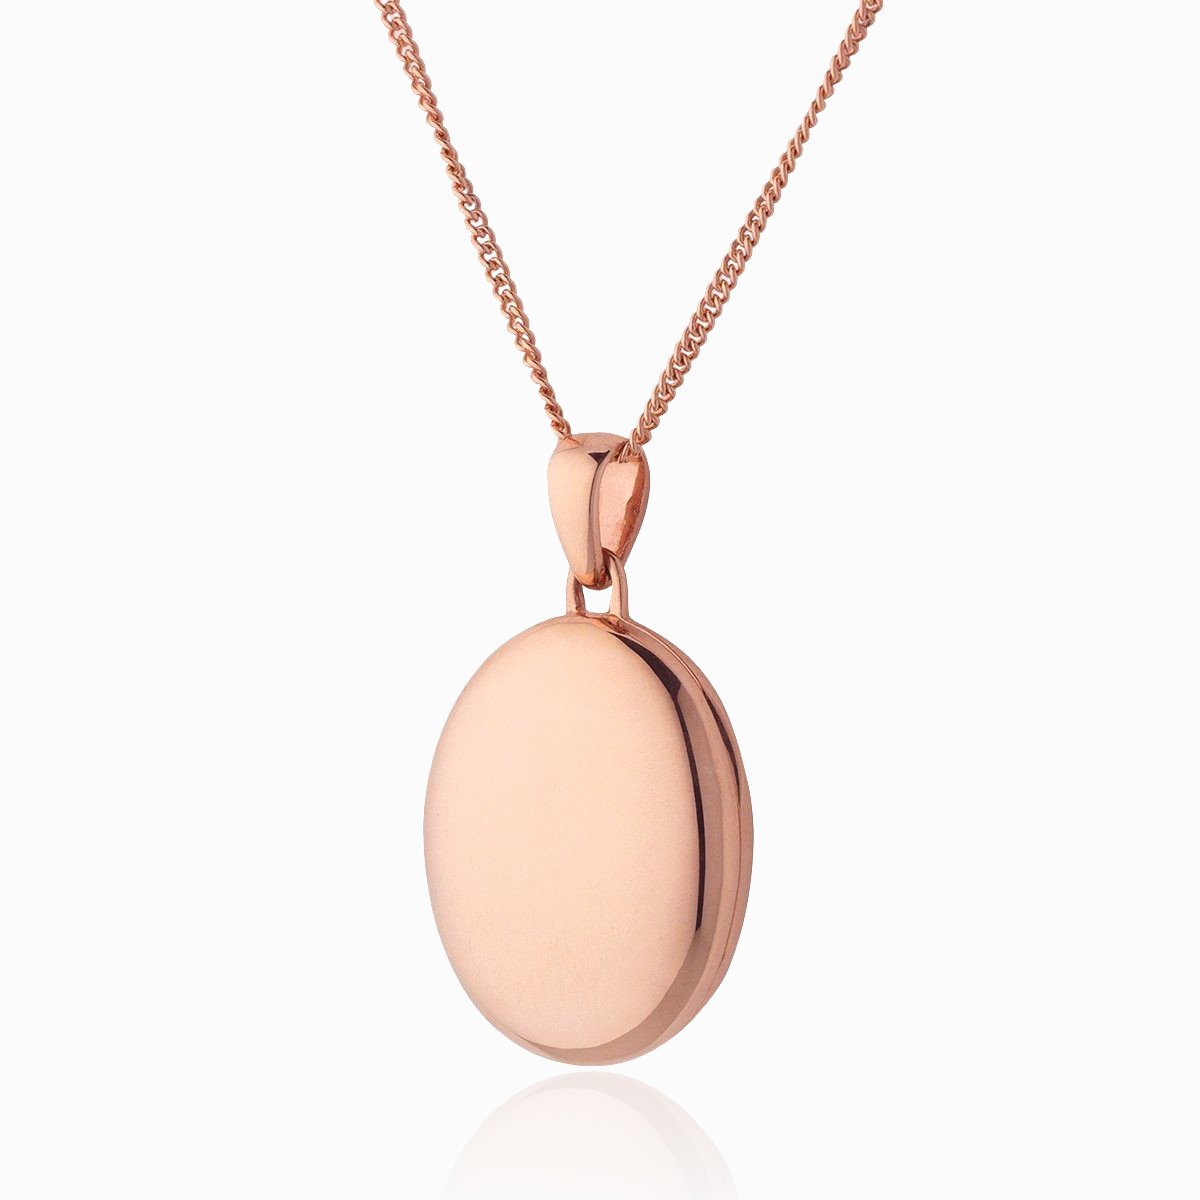 Front shot of a 9 ct rose gold oval locket on a 9 ct rose gold curb chain.